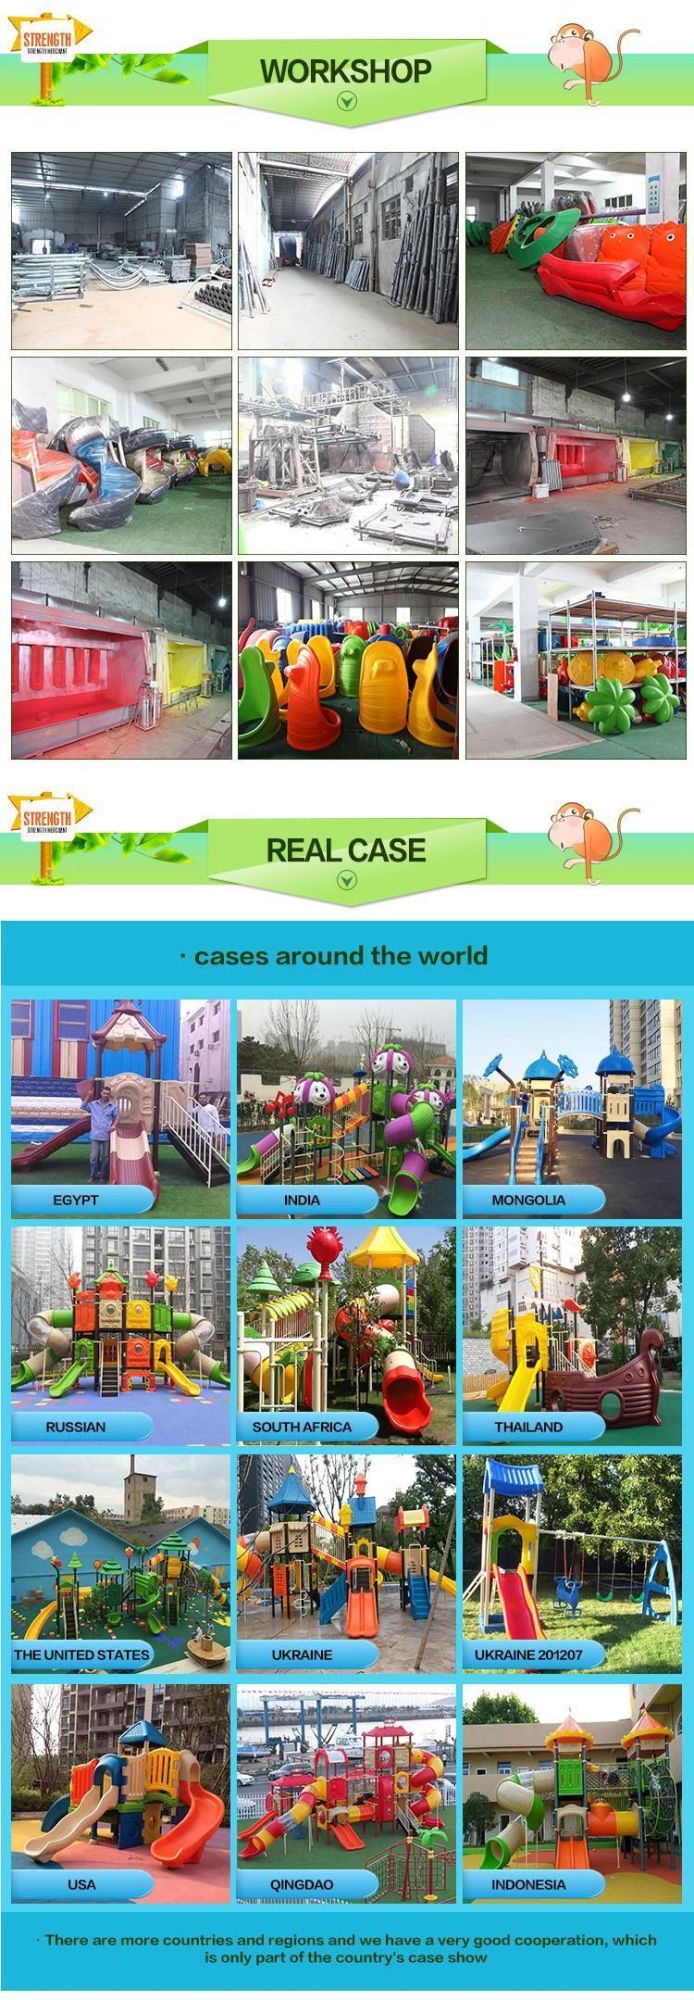 Zhejiang Factory Large Ship Design Adventure Baby Double Slide Water Playground